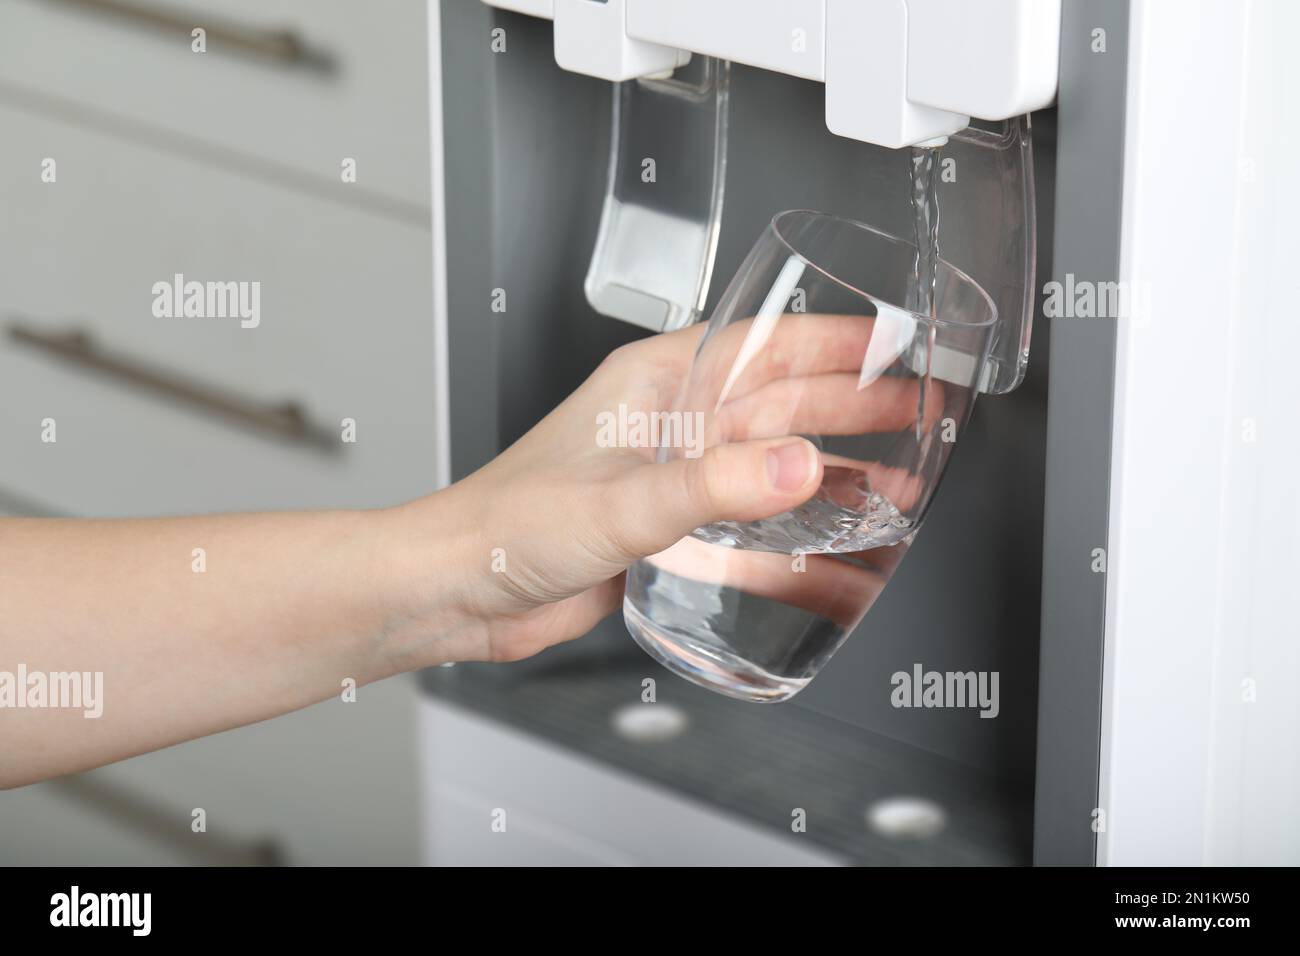 Water cooler filling water Cut Out Stock Images & Pictures - Alamy